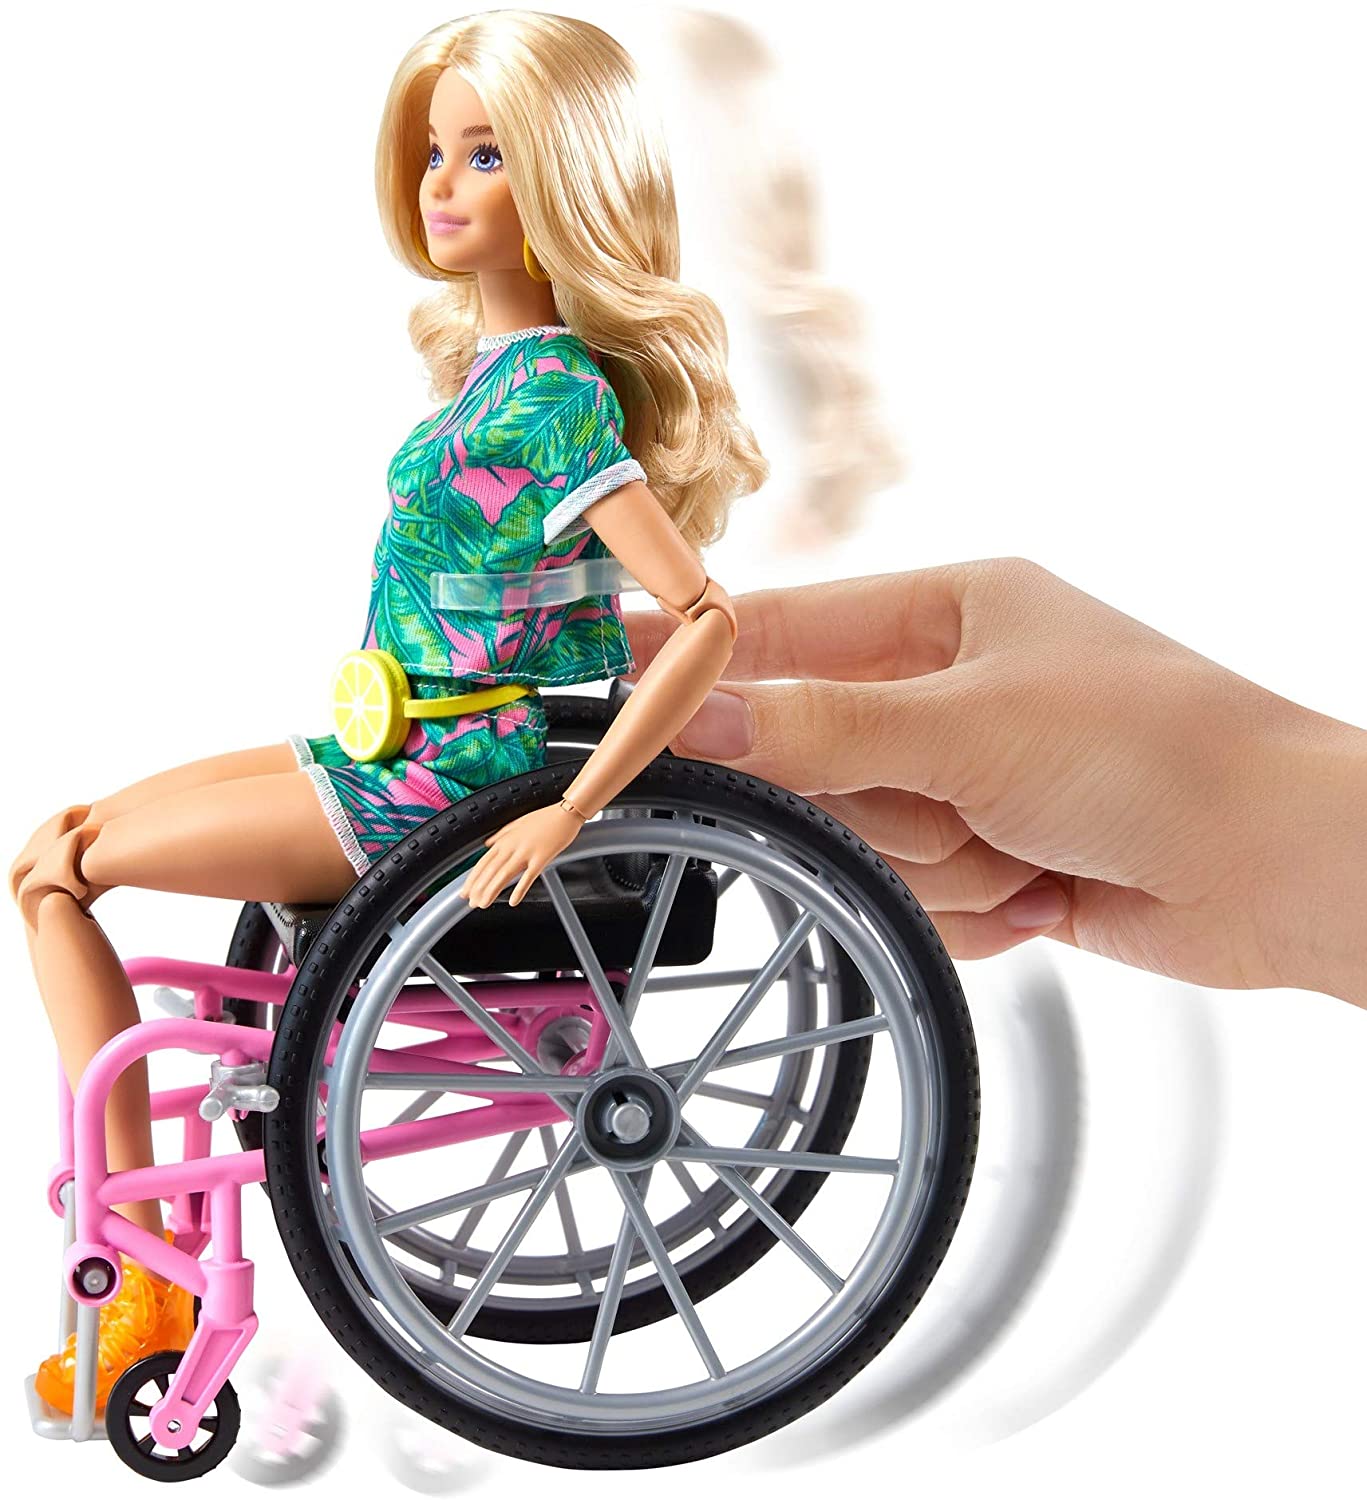 New Barbie Fashionista Wheelchair dolls 2021 - first Made to Move